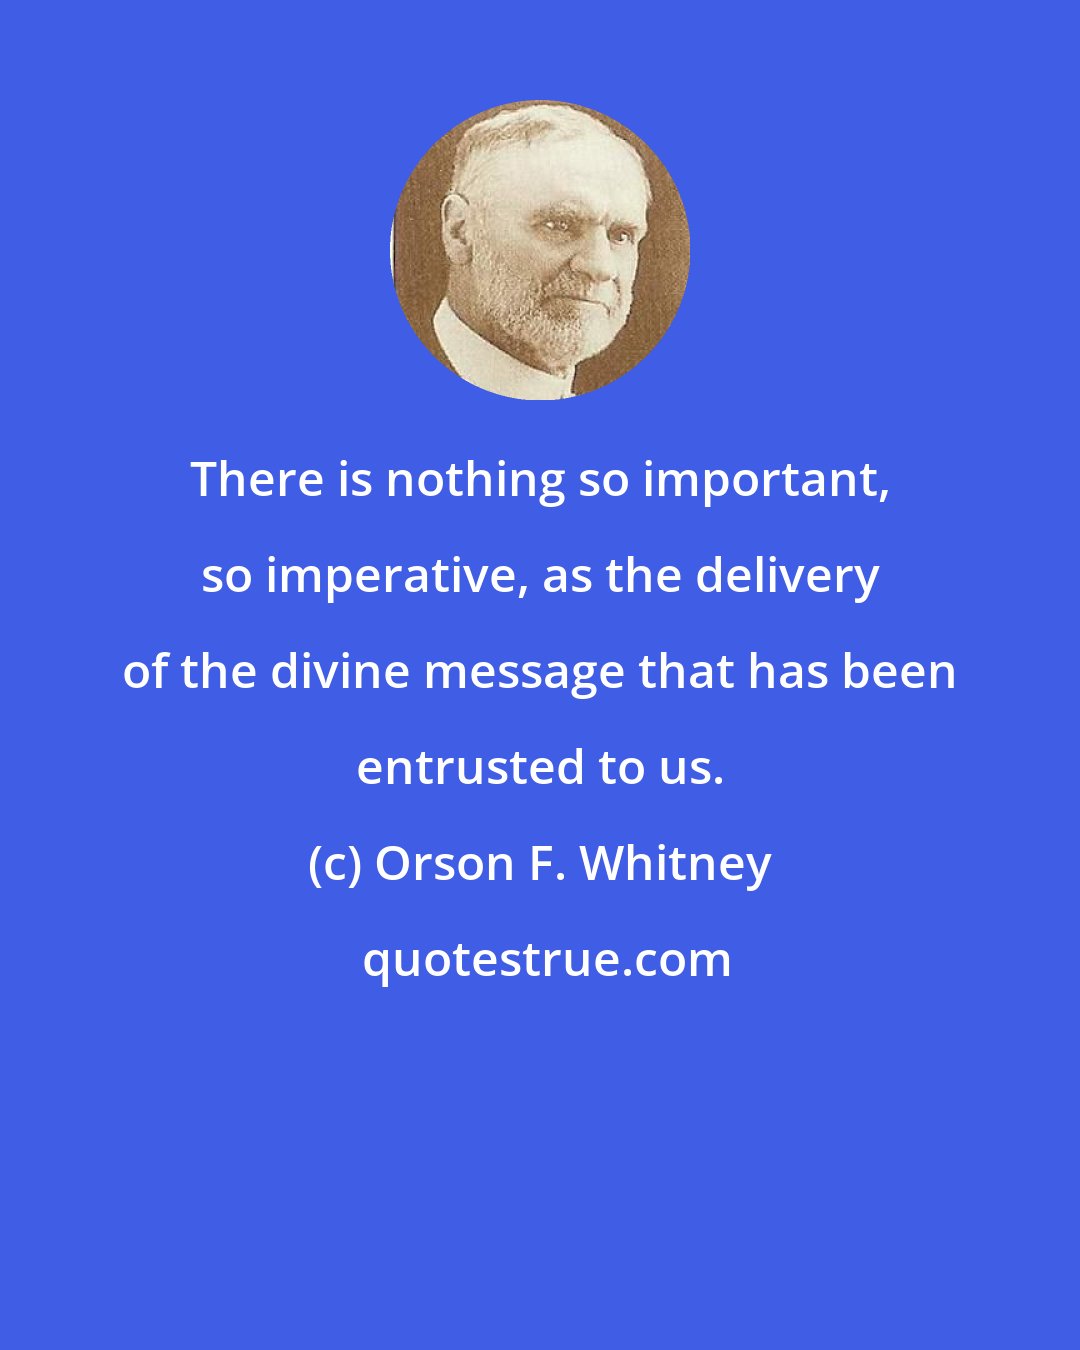 Orson F. Whitney: There is nothing so important, so imperative, as the delivery of the divine message that has been entrusted to us.